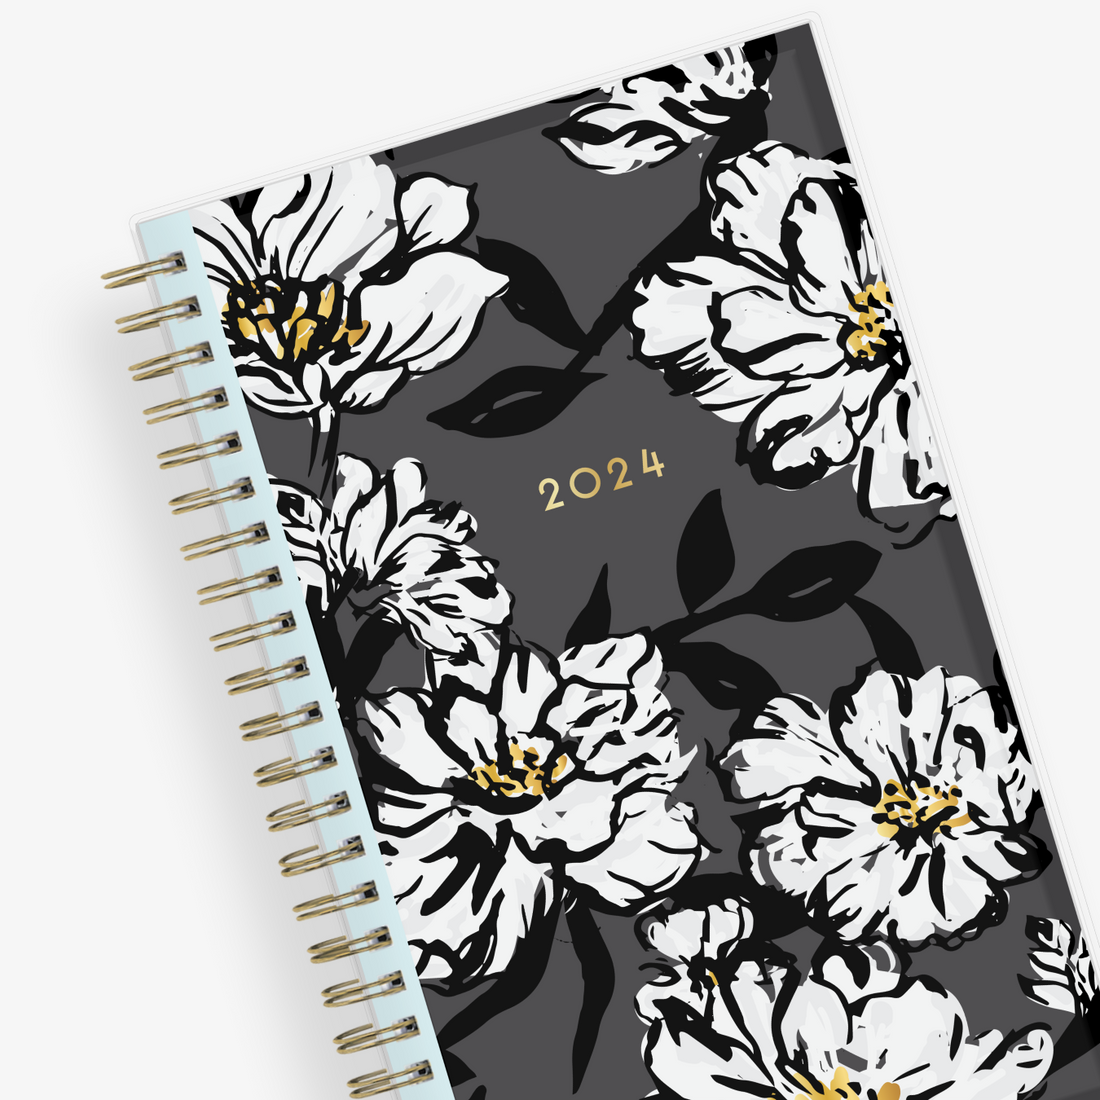 5x8 weekly monthly planner for January 2024 - December 2024 new year featuring silver twin wire-o binding, black/gray background, white florals and gold accents